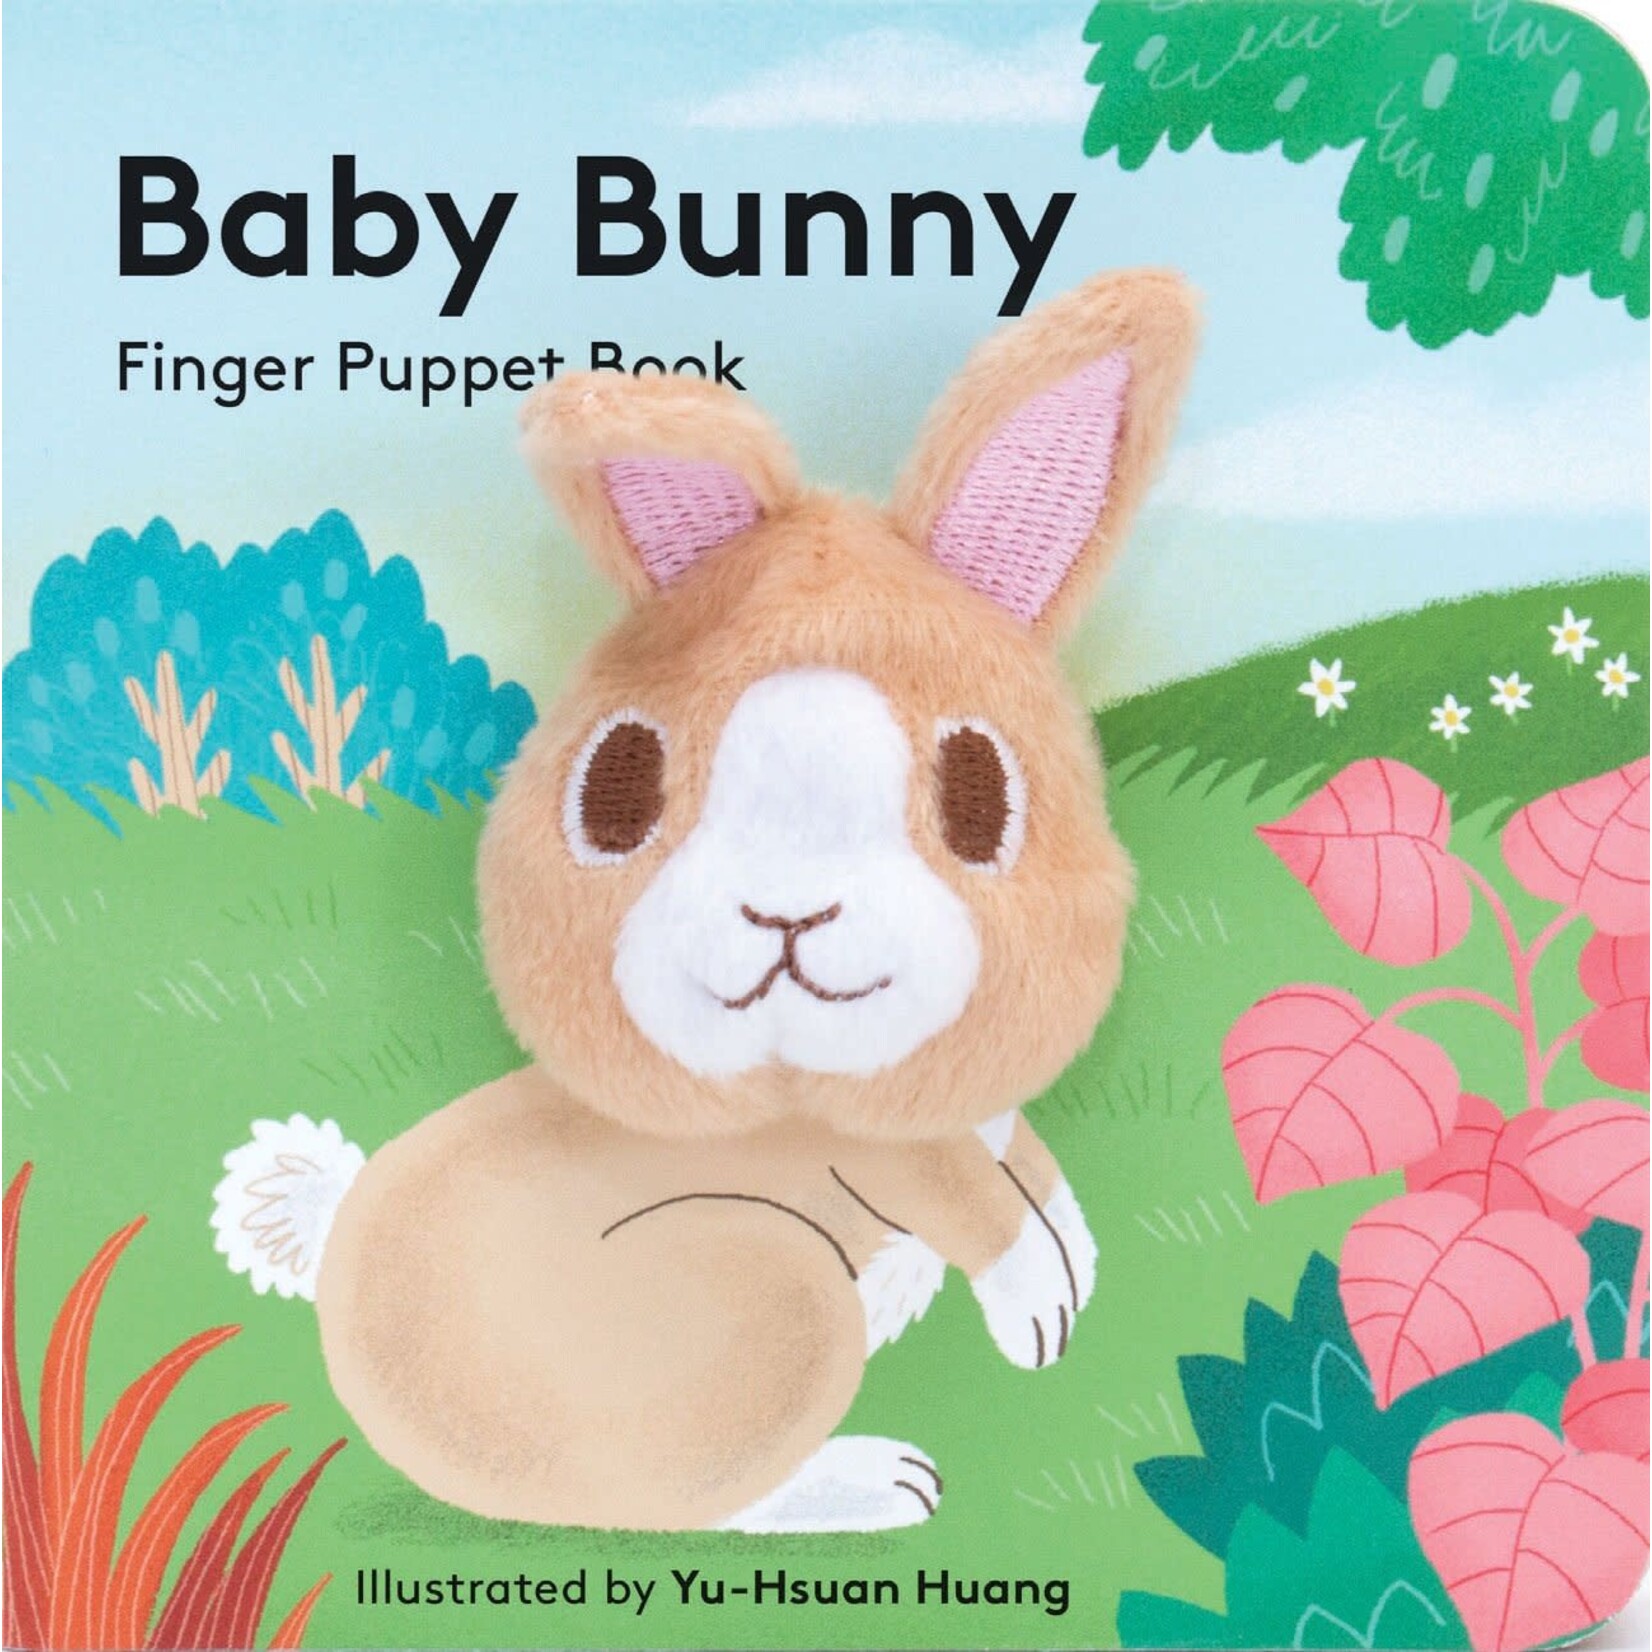 Chronicle Books Baby Bunny: Finger Puppet Book